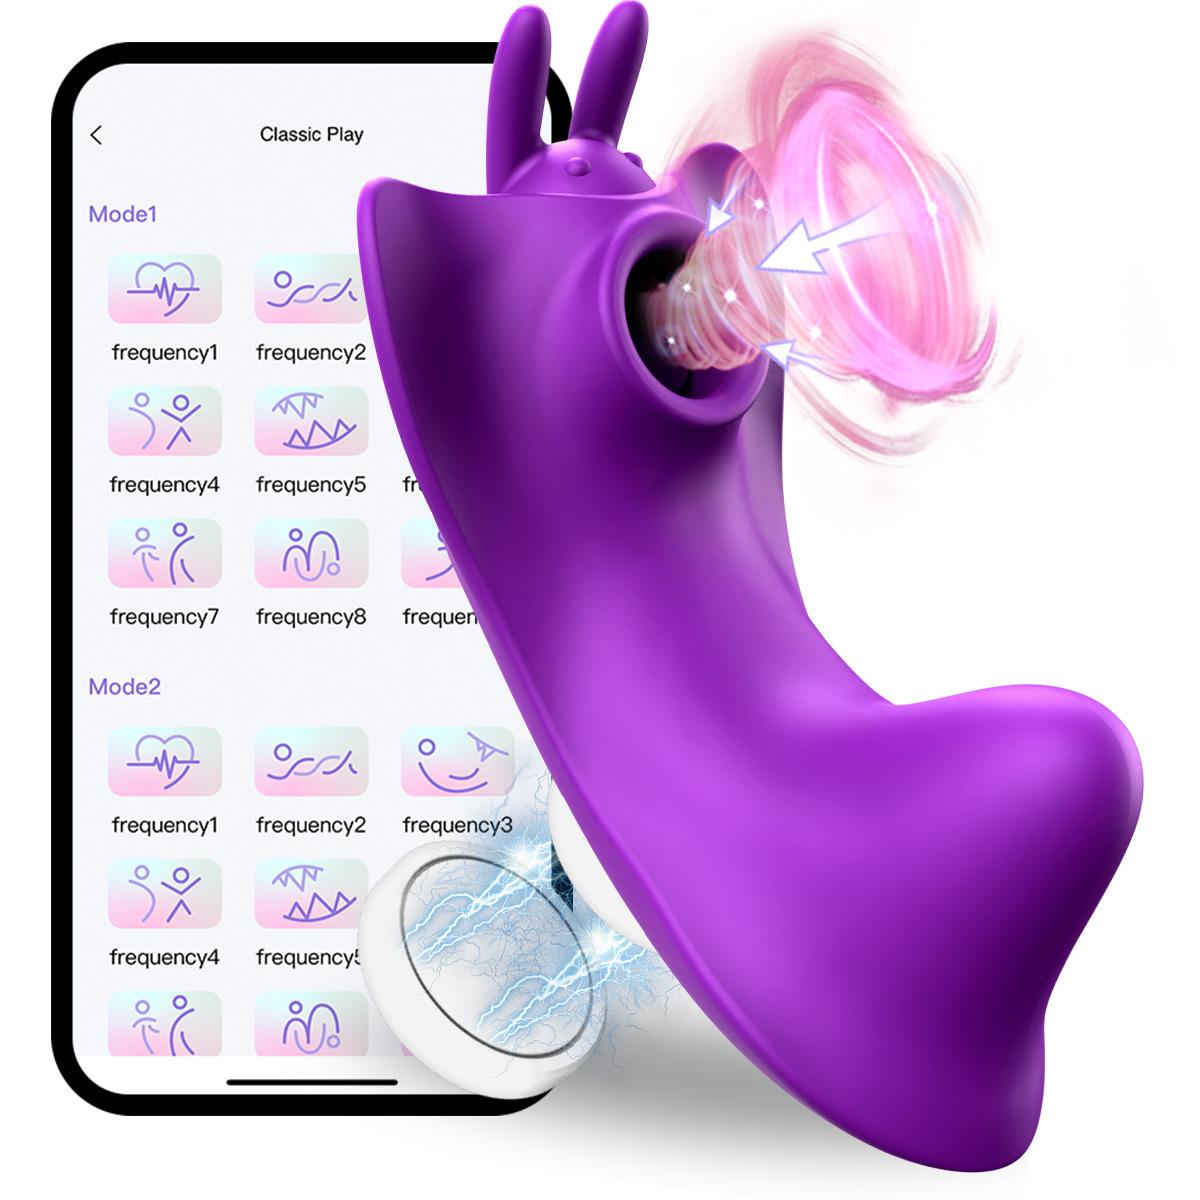 Fairykiss App Remote Control 9 Suction Vibration Mode Female Wearable Vibrating Massager Panty Women Vibrator Sex Toys For Man